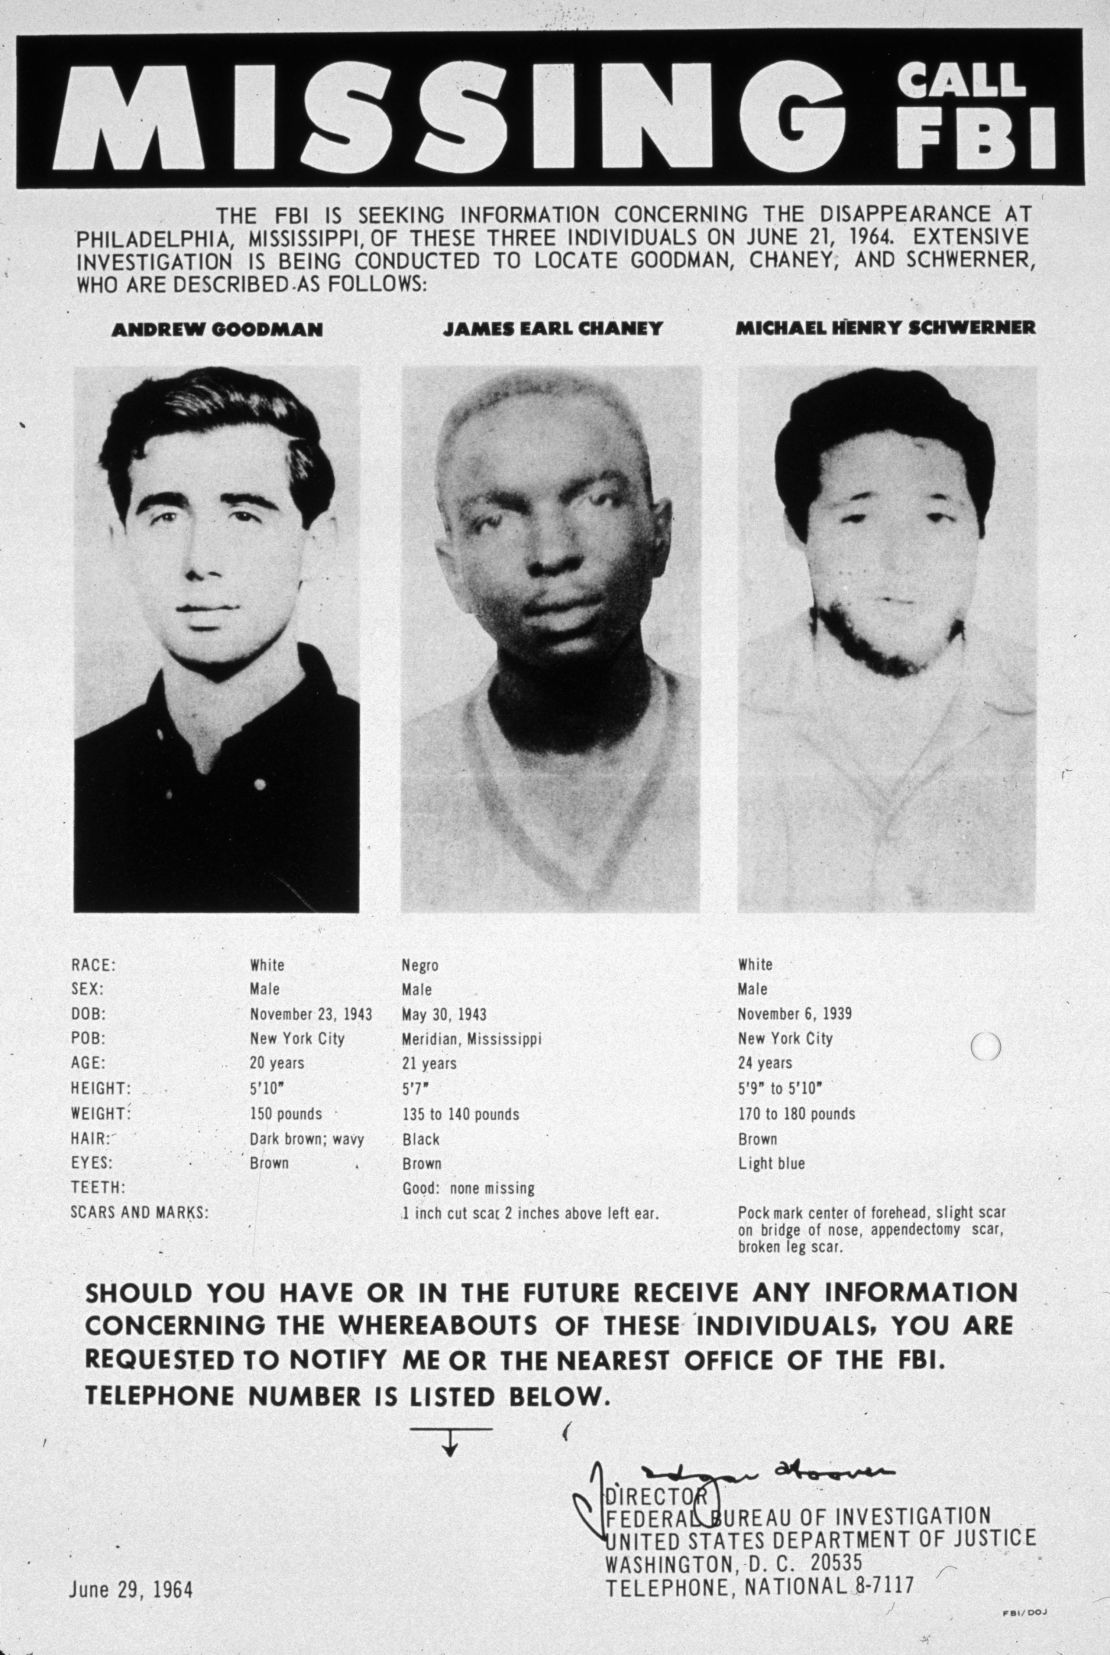 The 1964 FBI flier for the missing civil rights students Andrew Goodman, James Chaney and Michael Schwerner.